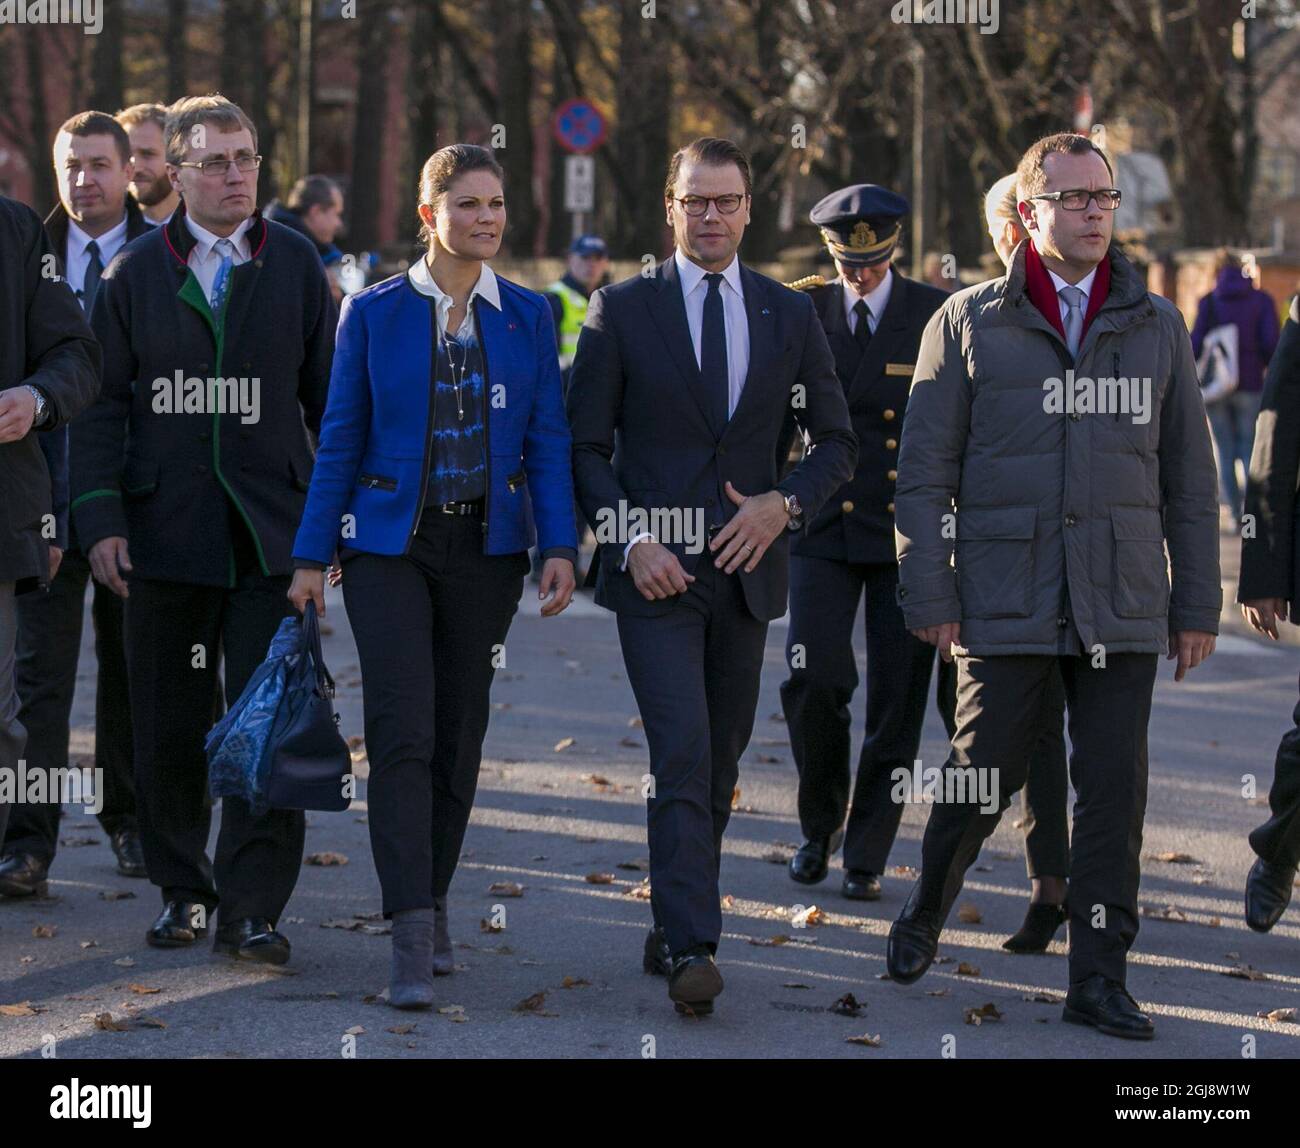 Tartu 2014-10-29 Crown Princess Victoria and Prince Daniel arrive at the Estonian National Museum in Tartu together with the museum's director TÂ›nis Lukas and Tartus Mayor Urmas Klaas on the second day of the Crown Princess Couple's official visit to Estonia on October 29 201 Foto Karli Saul/ SCANPIX BALTICS / TT / kod 20985 ref:  Stock Photo